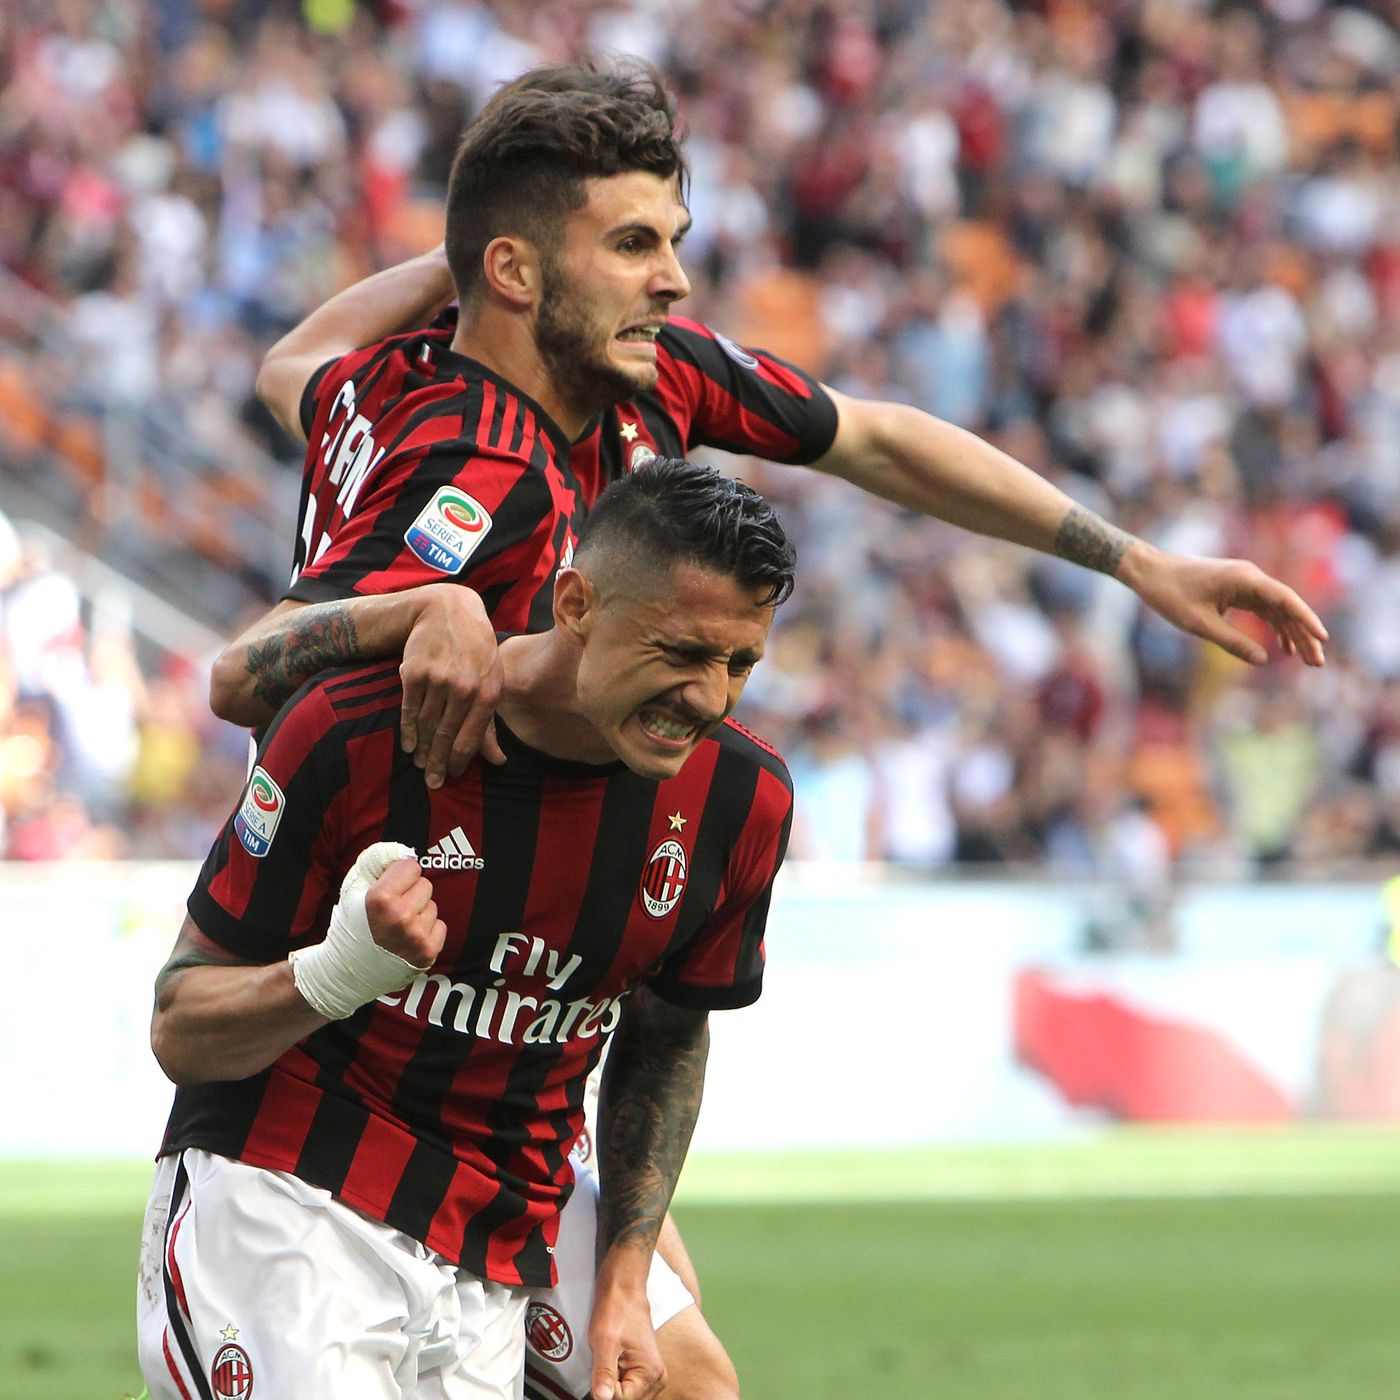 Cagliari vs. Milan: Match Preview, to Watch (Live Streams & TV), Prediction - The AC Milan Offside